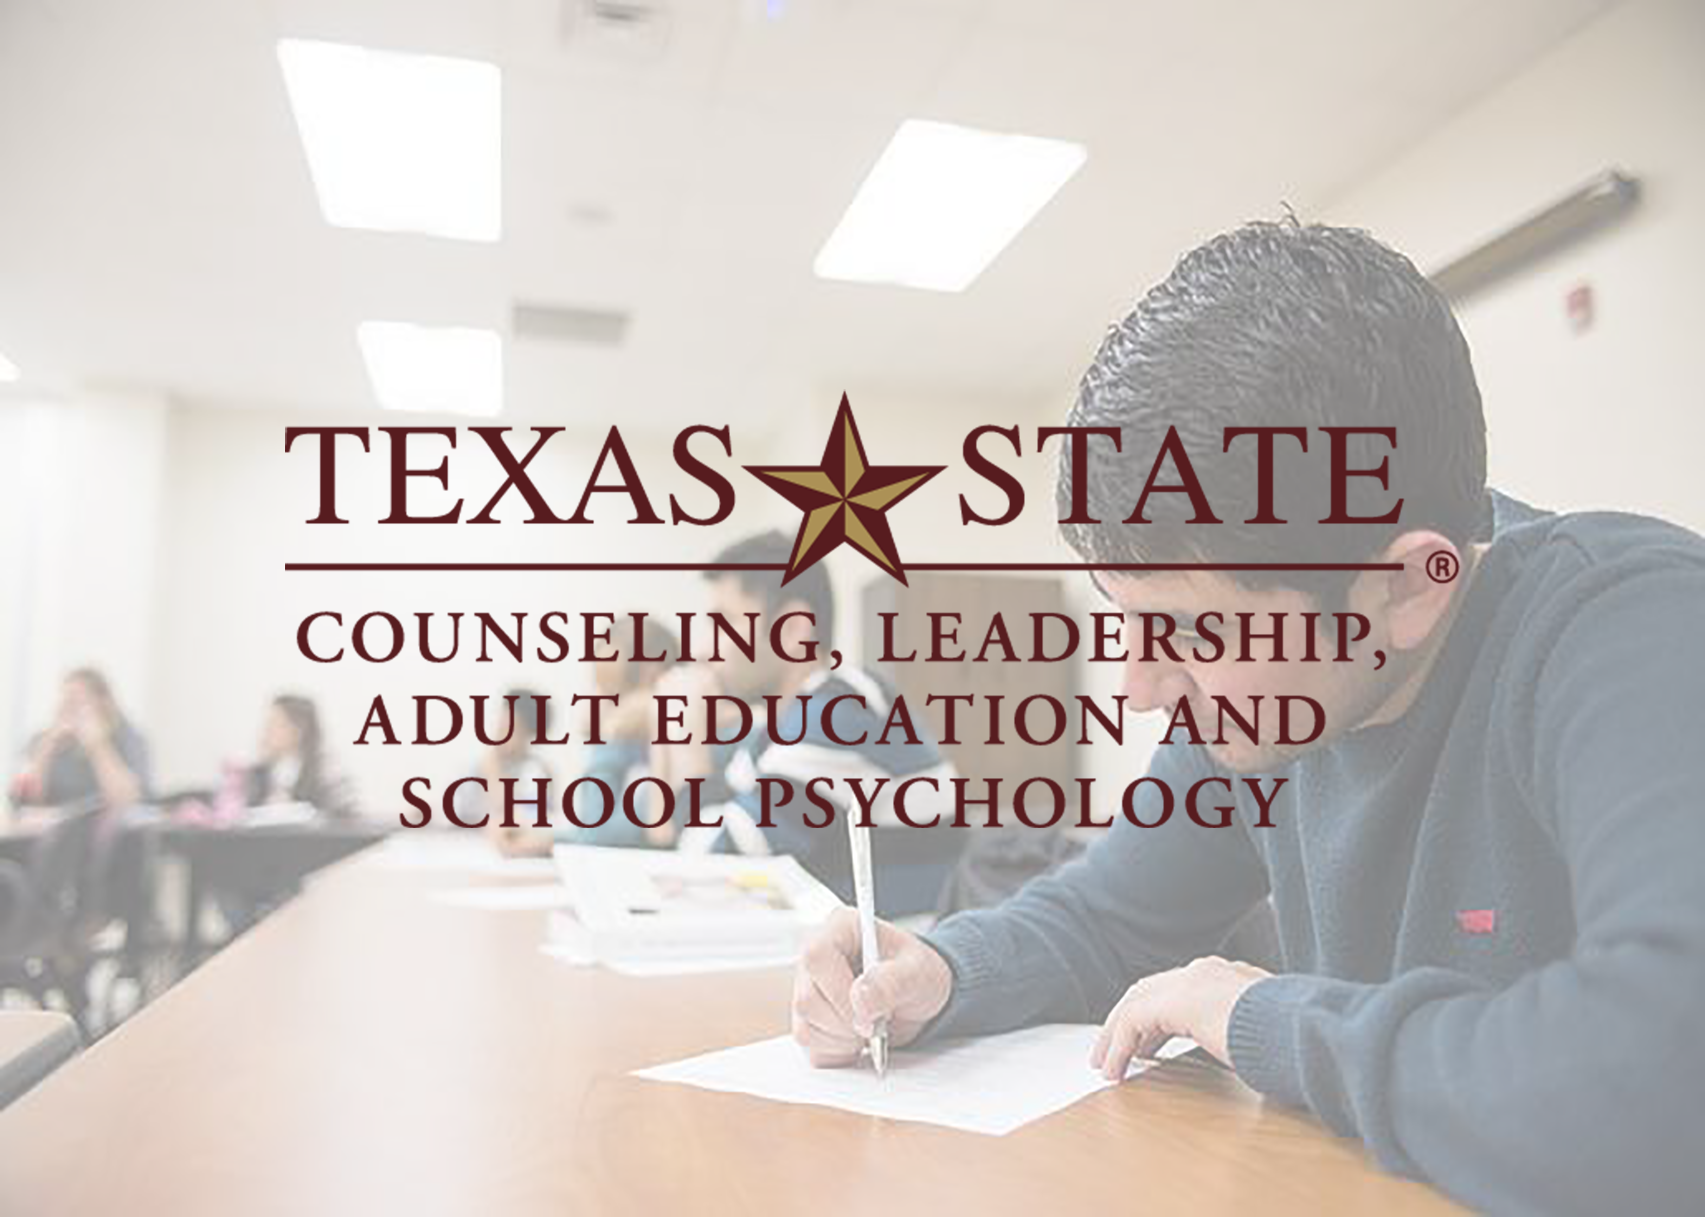 Counseling, Leadership, Adult Education and School Psychology